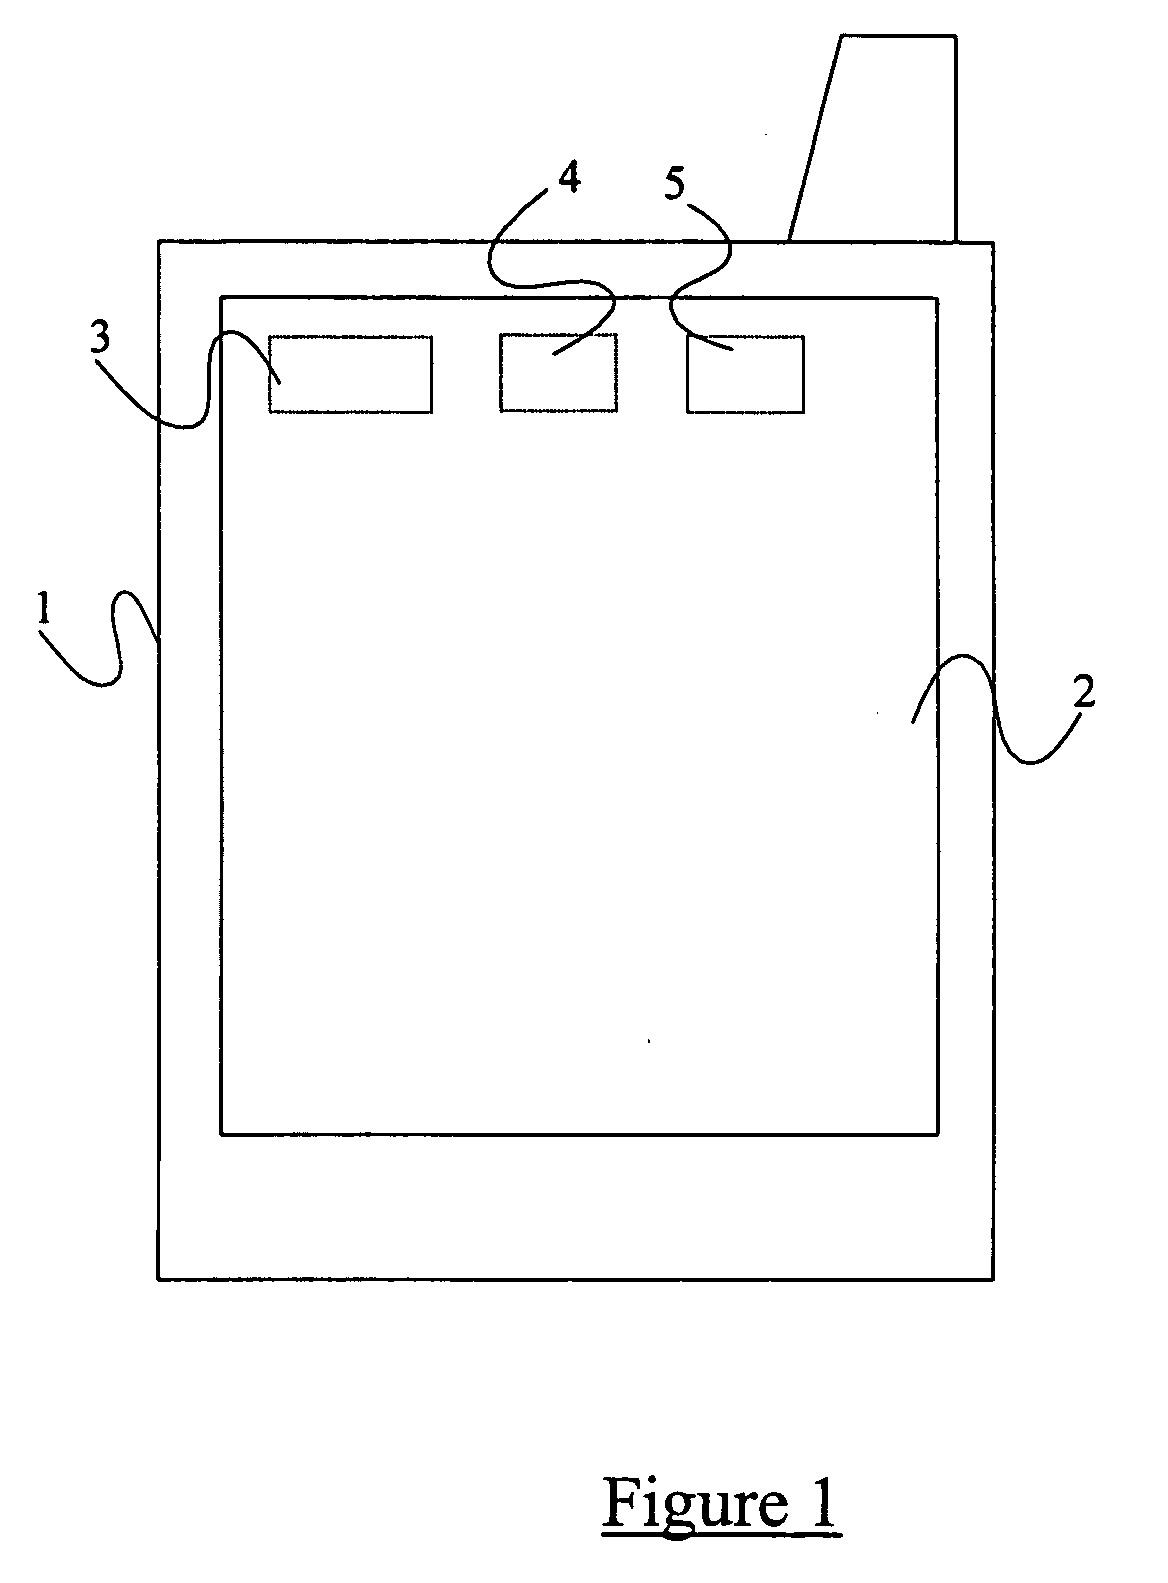 Method and apparatus for selecting a password